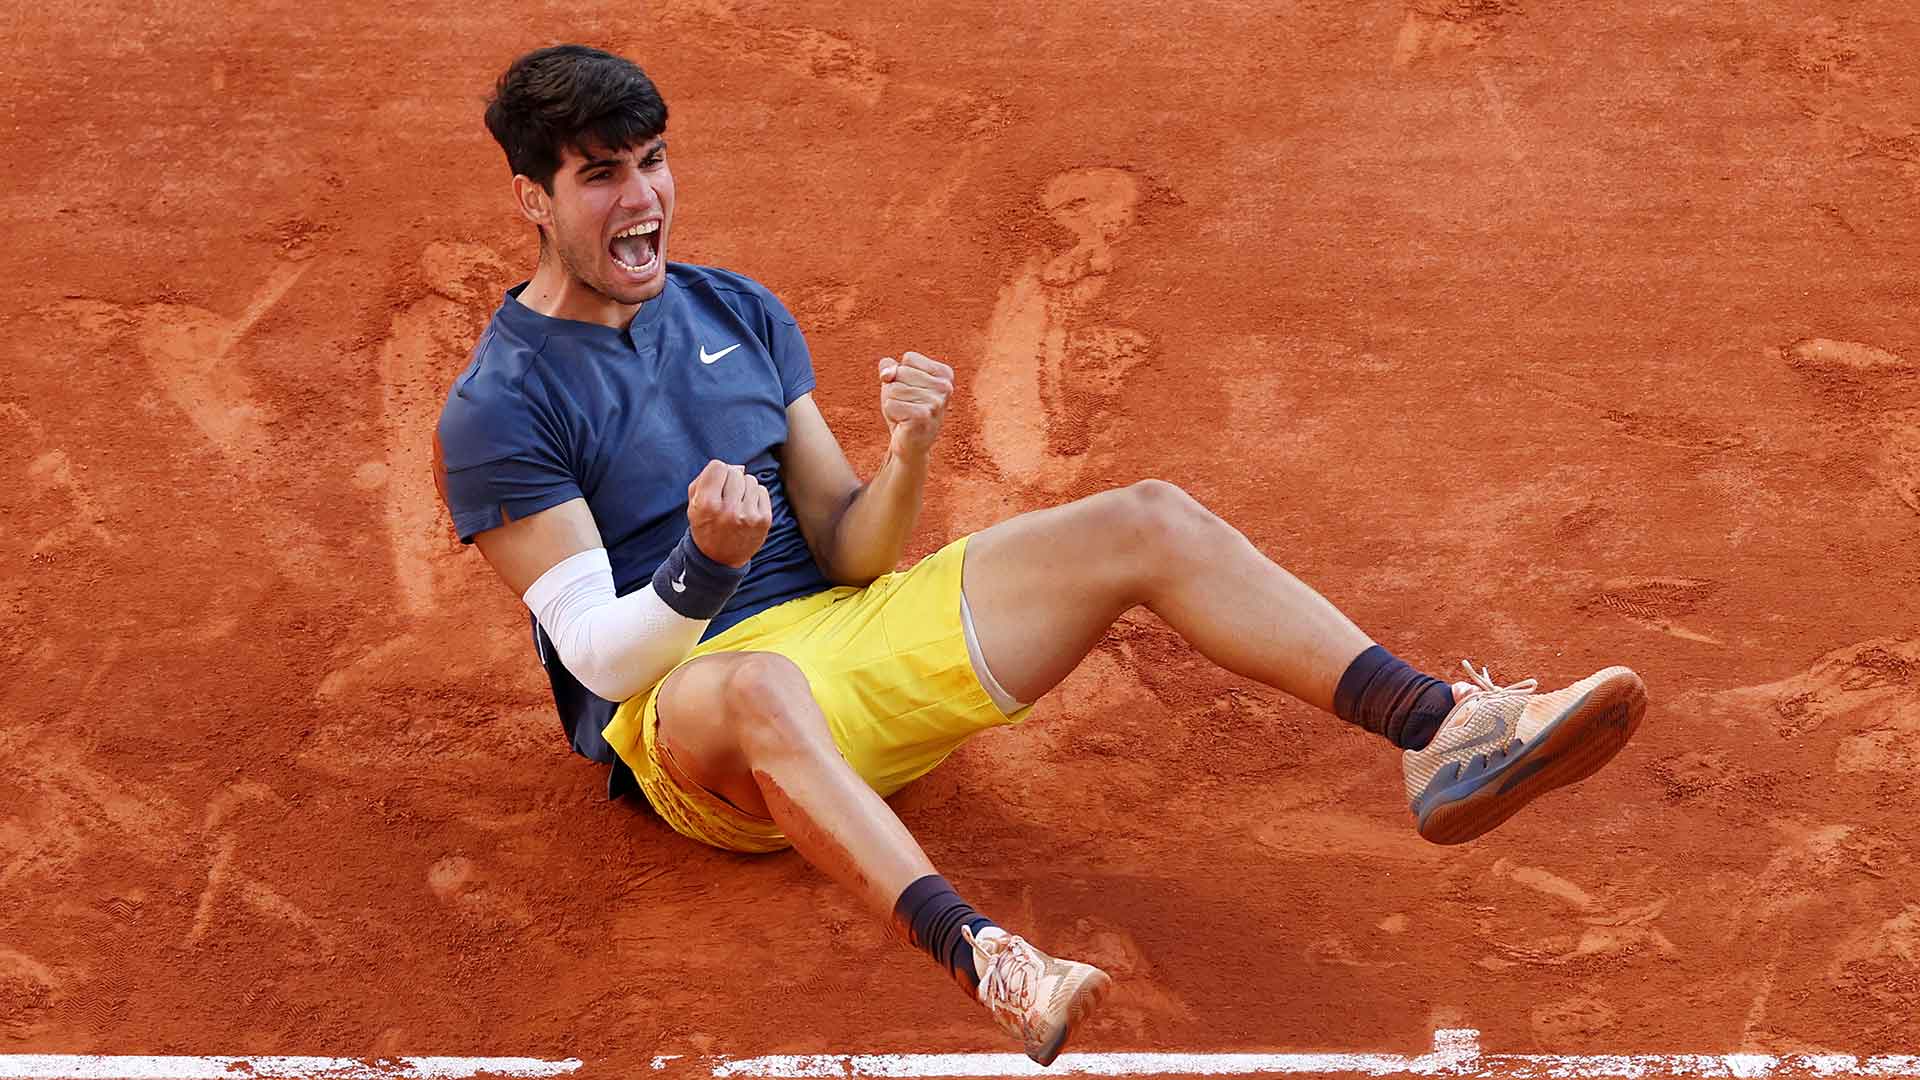 Alcaraz on Roland Garros triumph: 'It was something I dreamed of since I started playing'